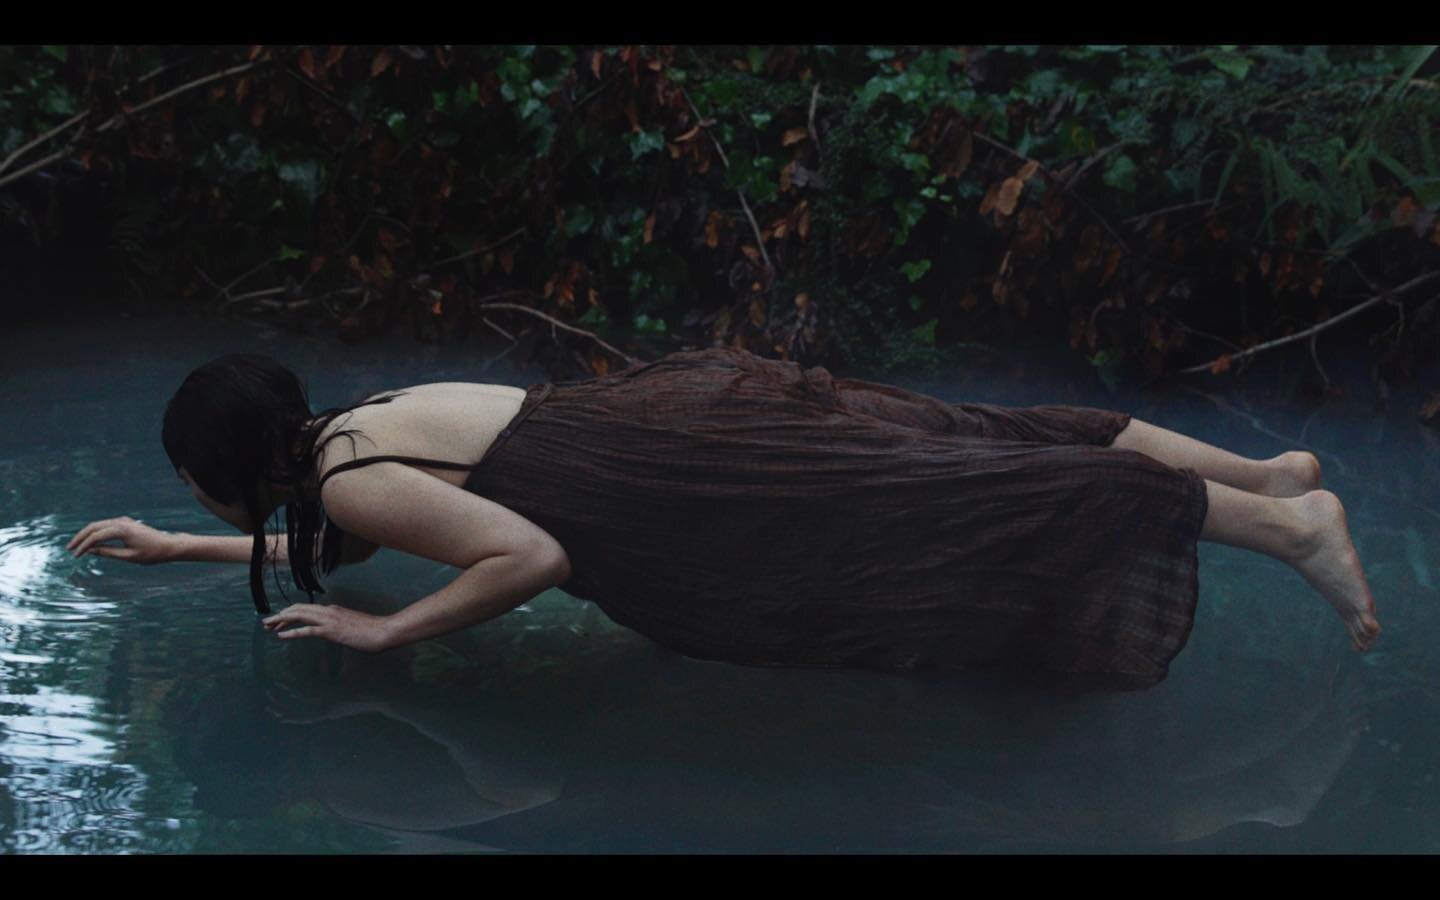 Incoming&hellip; Surreal still from a fashion film Directed by @mayerkatja 

With @quynhgallagher @ninaveech @elle_mcmahon_
.
.
.
.
.
.
.
.
.
.
.
.
.
.
.
.
.
.
.
.
.
.
.
.
.
.
.
#dop #cinematographer #cinematography #fashion #directorpfphotography #f